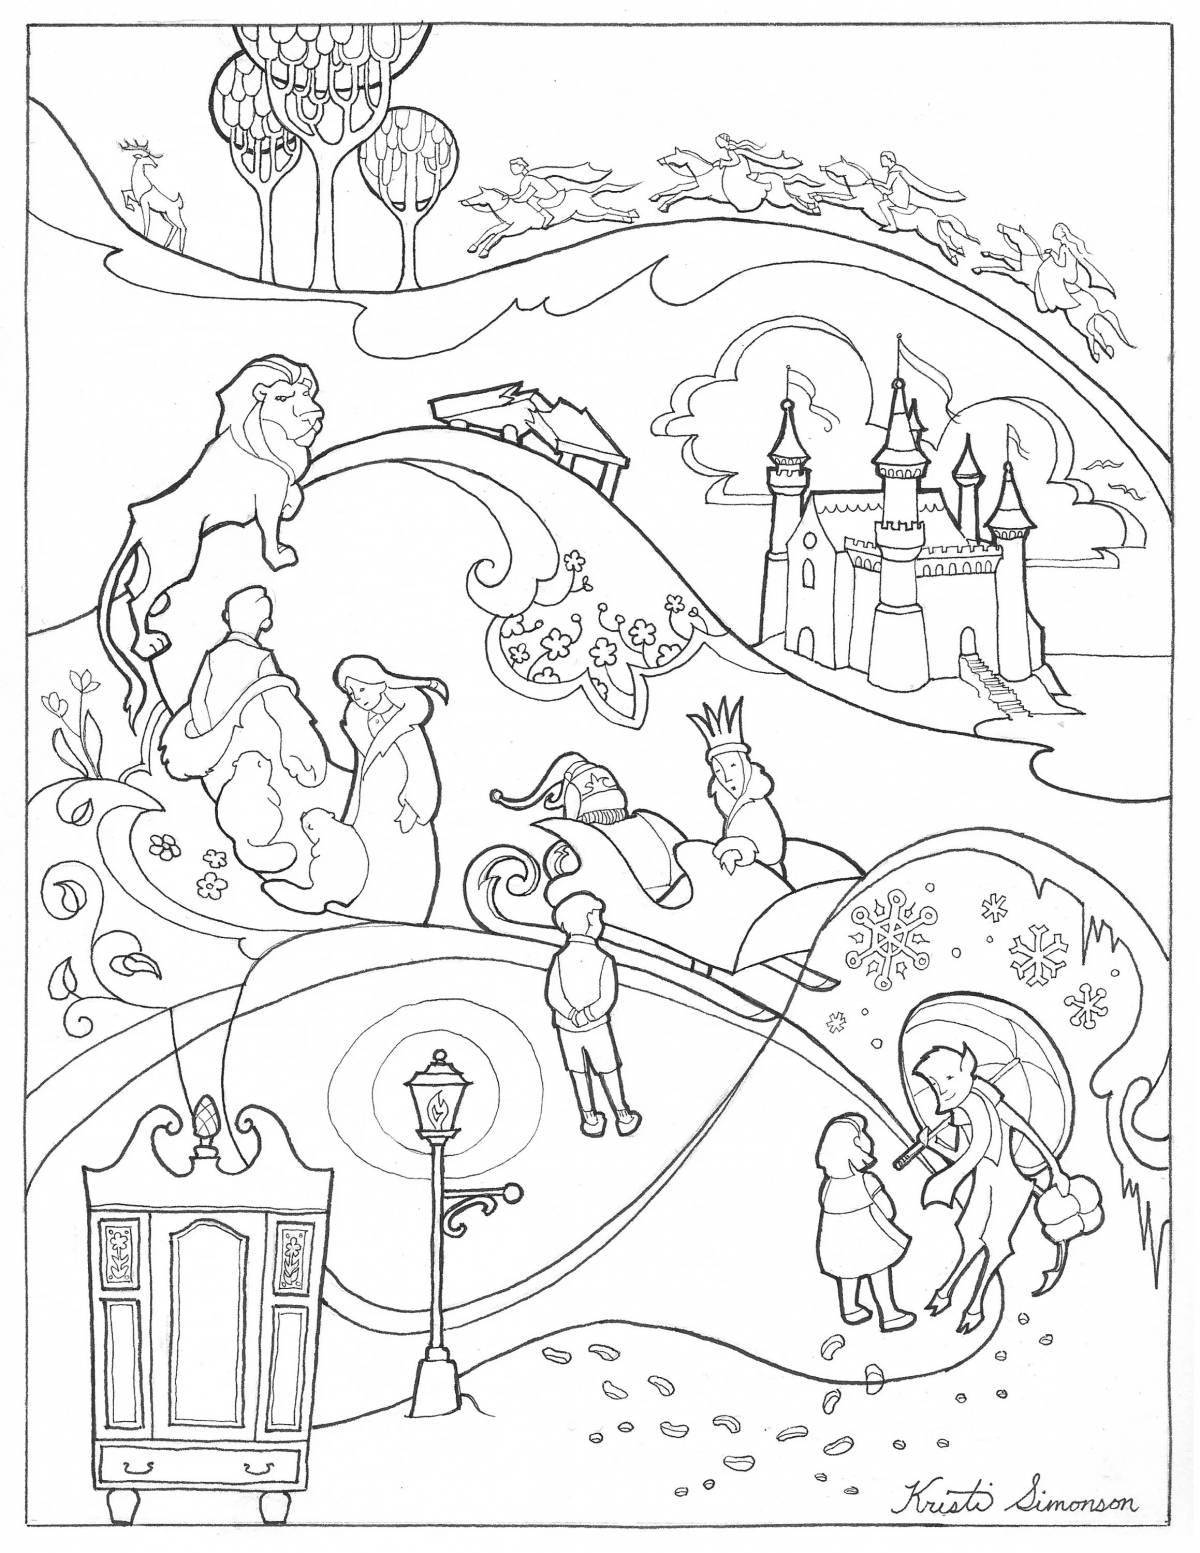 Amazing chronicles of narnia coloring page